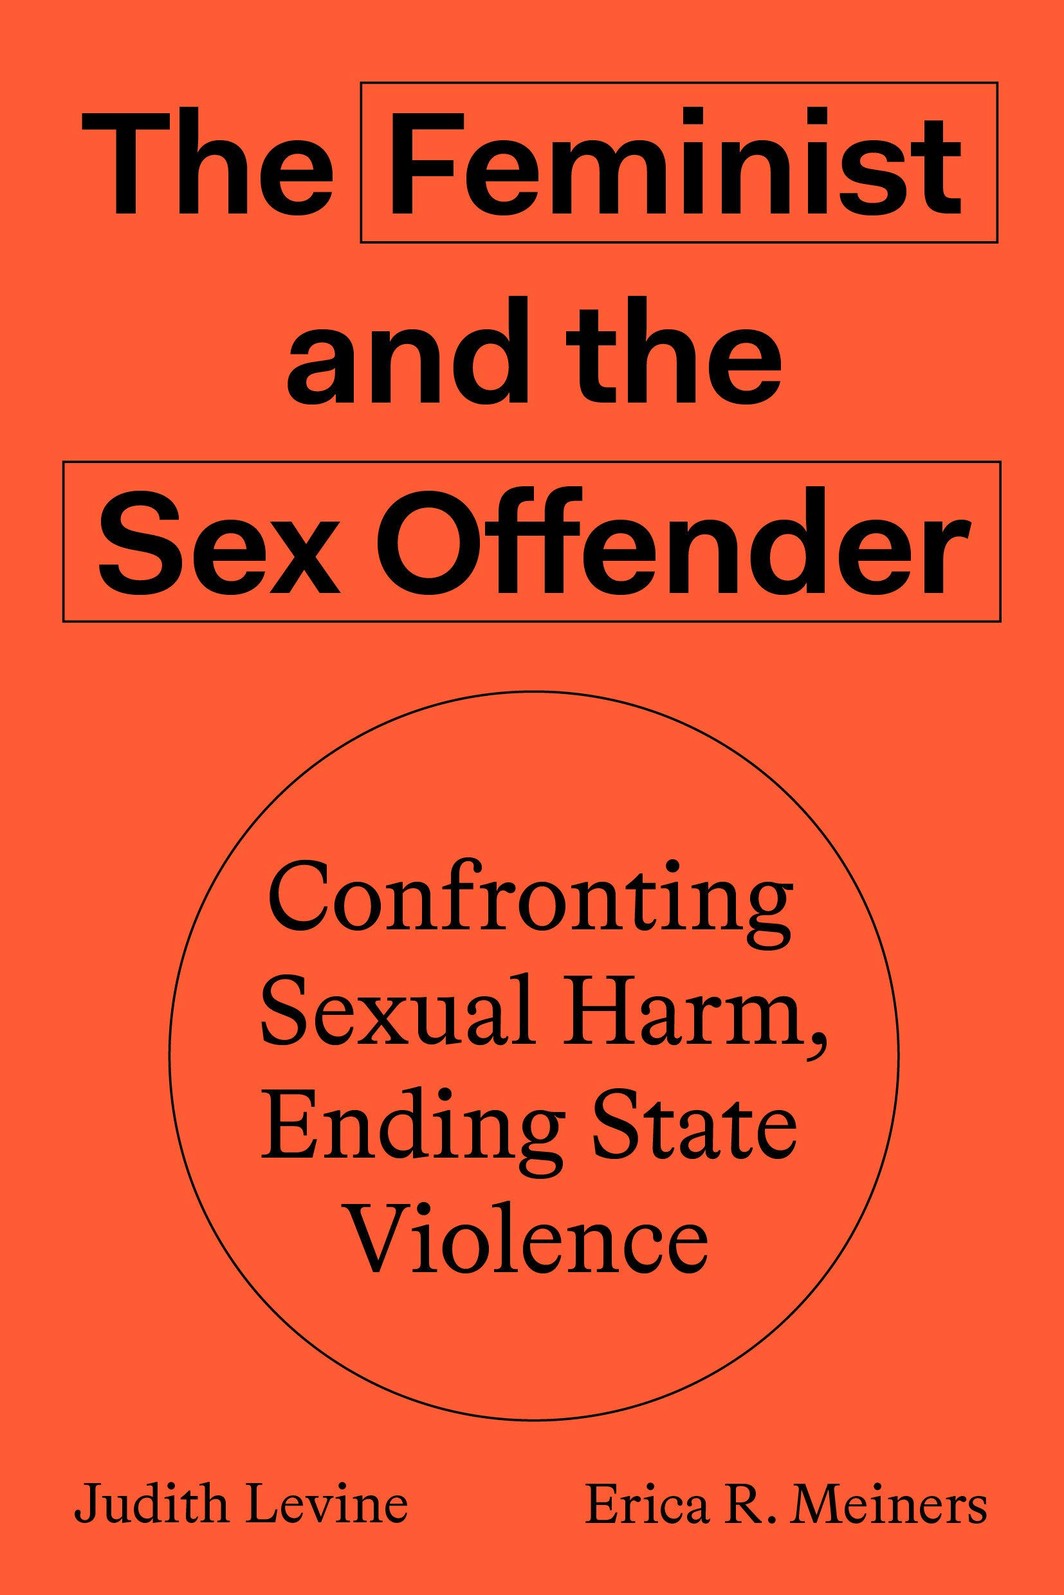 The cover of The Feminist and the Sex Offender: Confronting Sexual Harm, Ending State Violence